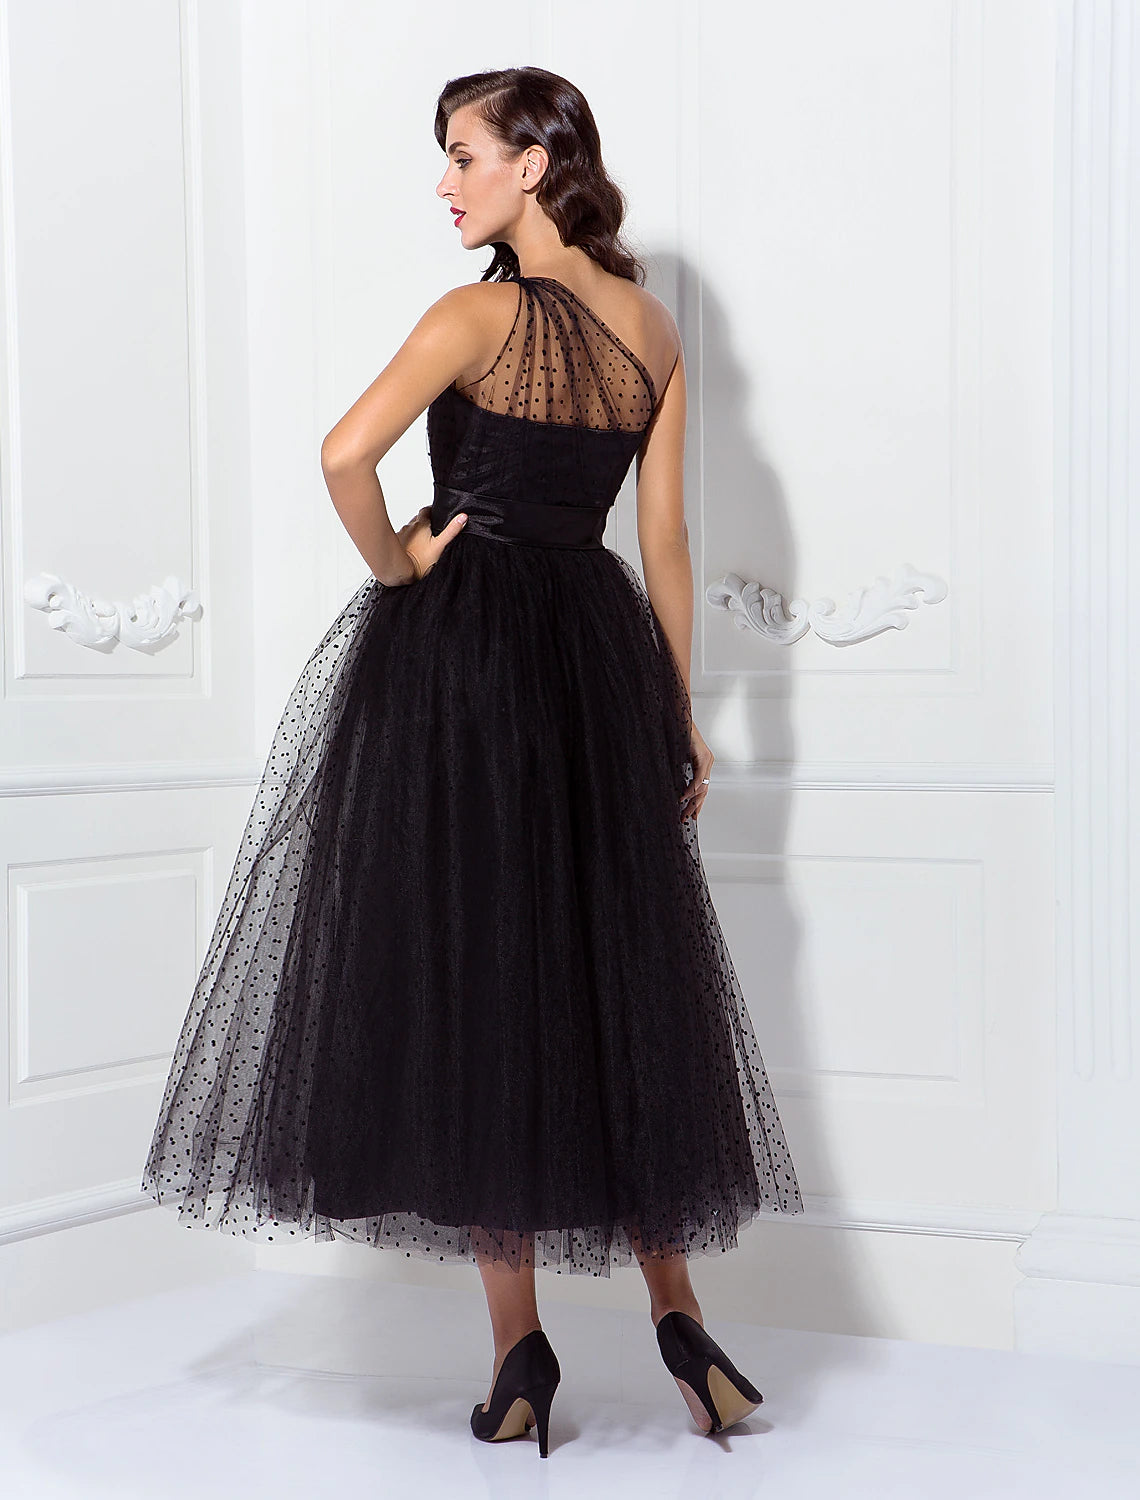 A-Line Cocktail Dresses Vintage Dress Wedding Guest Cocktail Party Ankle Length Sleeveless One Shoulder Wednesday Addams Family Tulle with Pleats Pattern